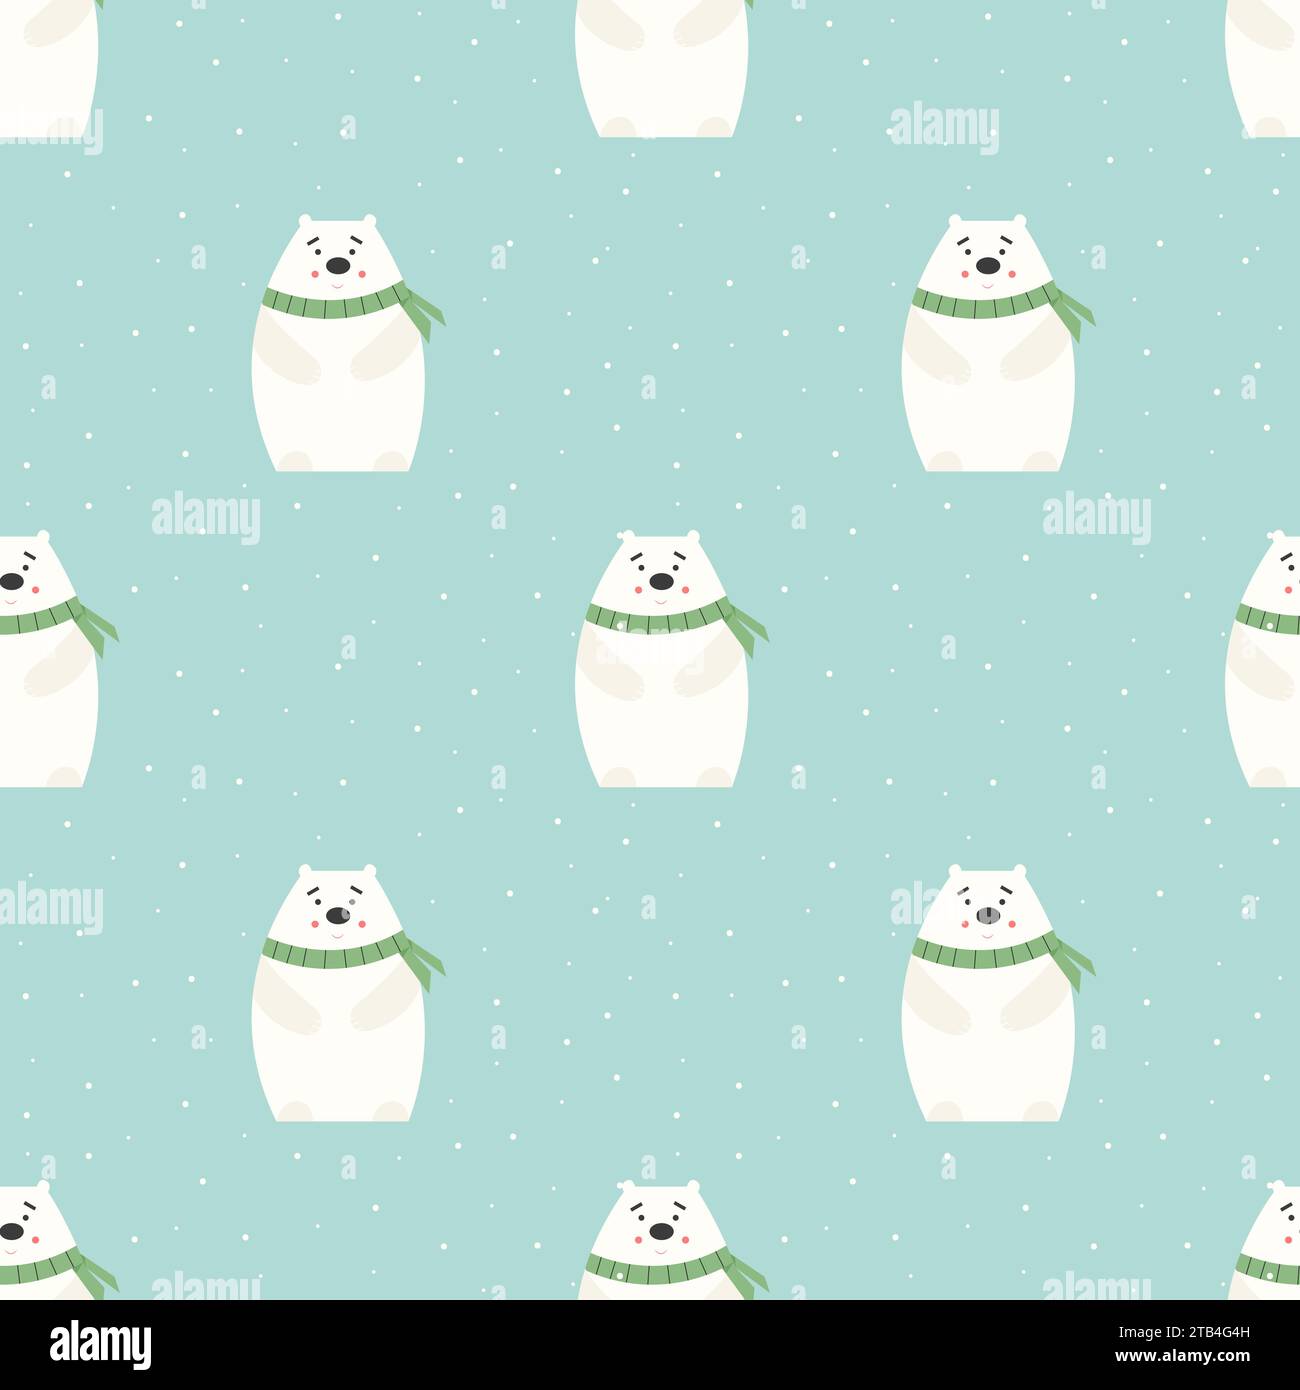 Winter seamless pattern with cute white bear in a knitted scarf under the falling snow, with changeable background color. Vector flat illustration for Stock Vector